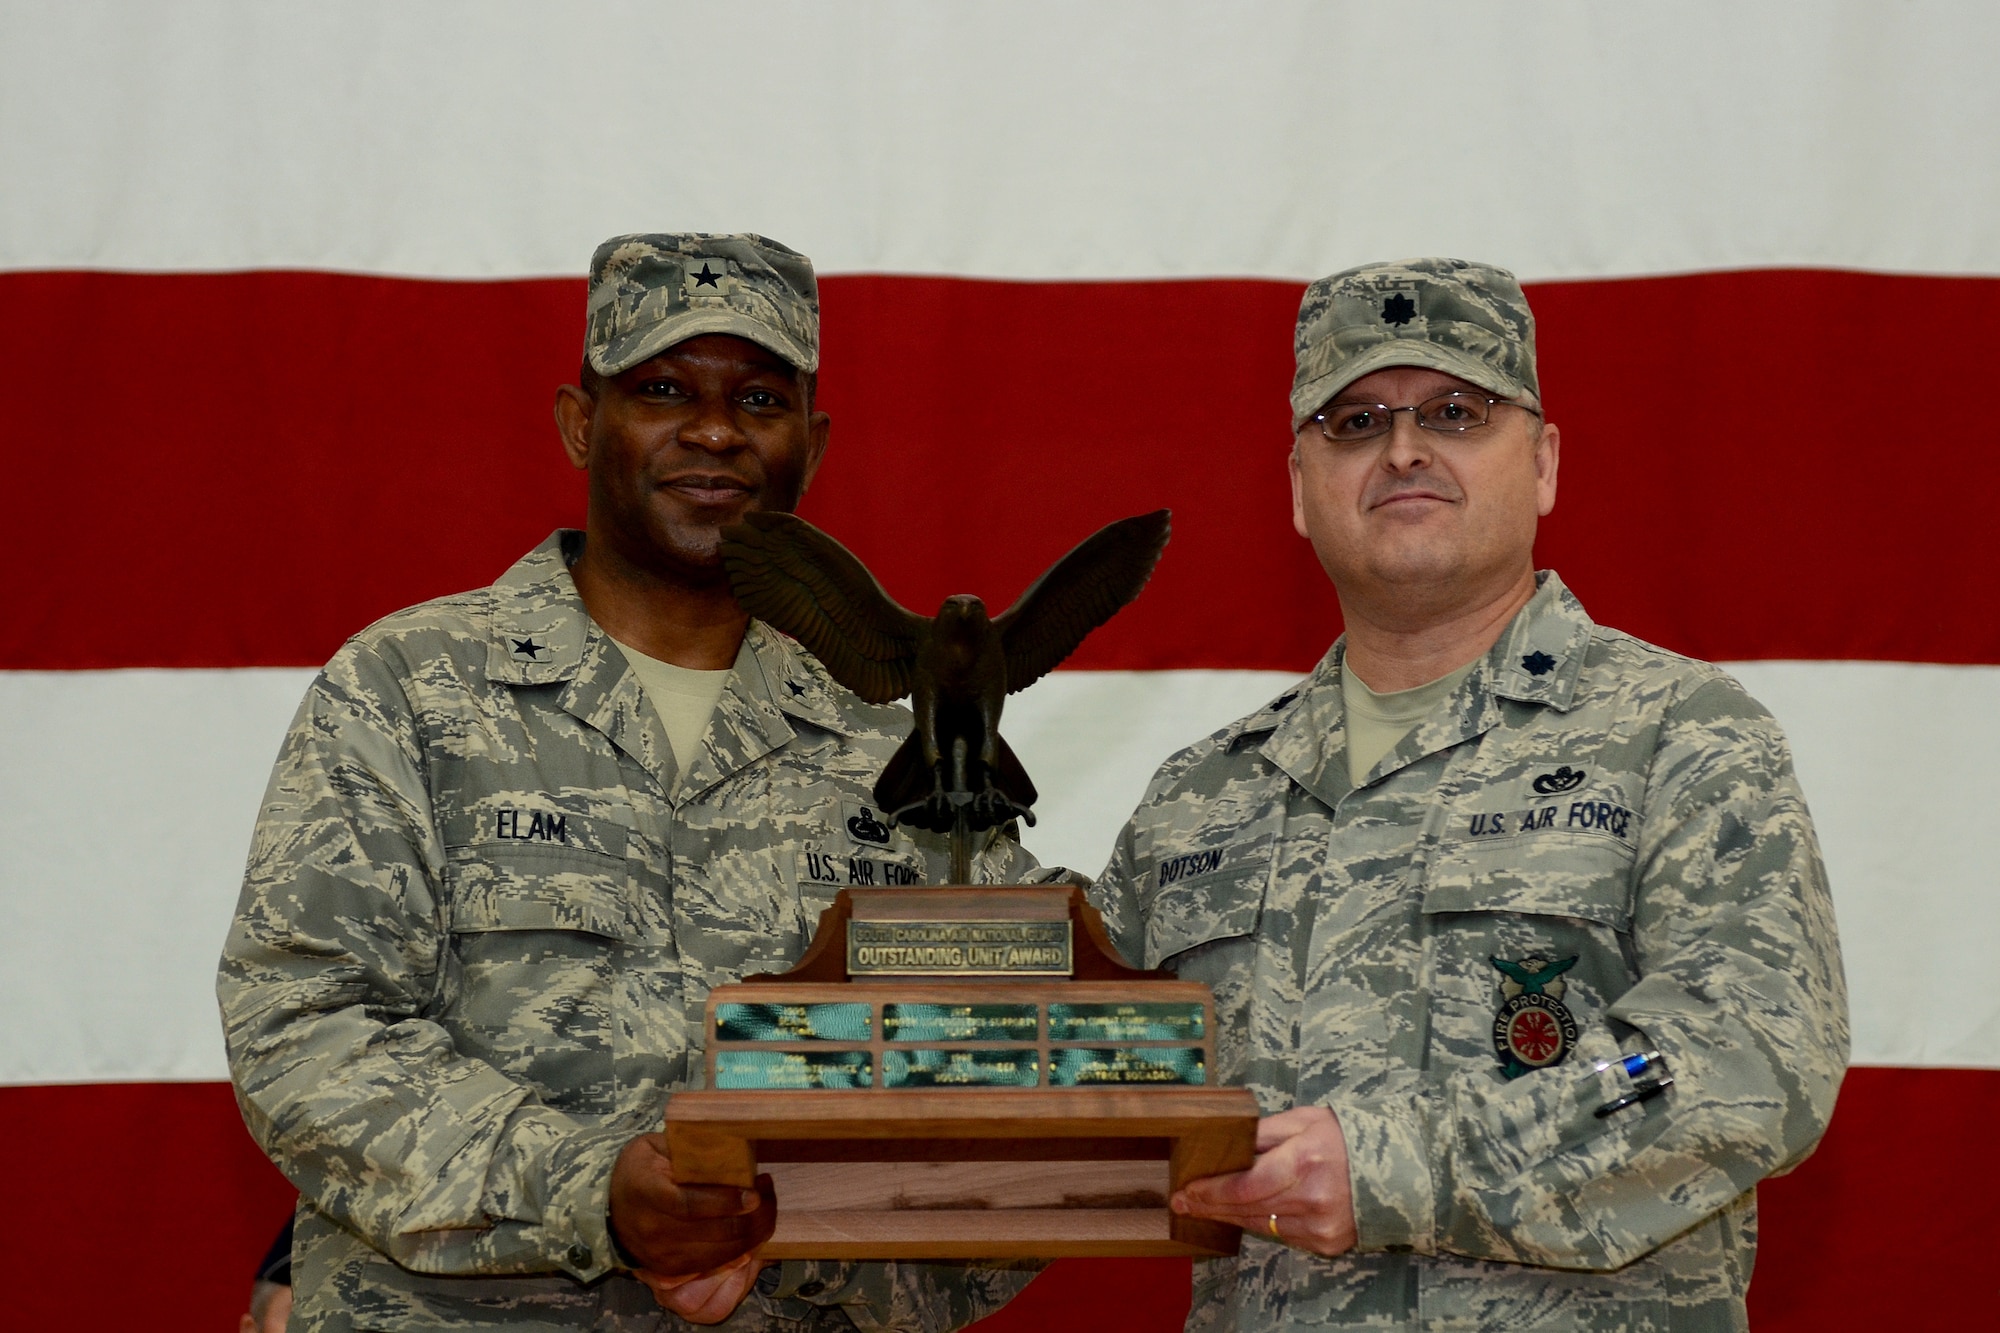 U.S. Air Force Brig. Gen. Calvin Elam, Assistant Adjutant General for Air for the South Carolina Air National Guard, presents Lt. Col. Timothy Dotson, the 169th Civil Engineer Squadron commander, with the trophy for being named the 2013 Unit of the Year, during a mass formation in the main hangar, Jan. 12, 2014.  (U.S. Air National Guard photo by Tech. Sgt. Caycee Watson/Release)